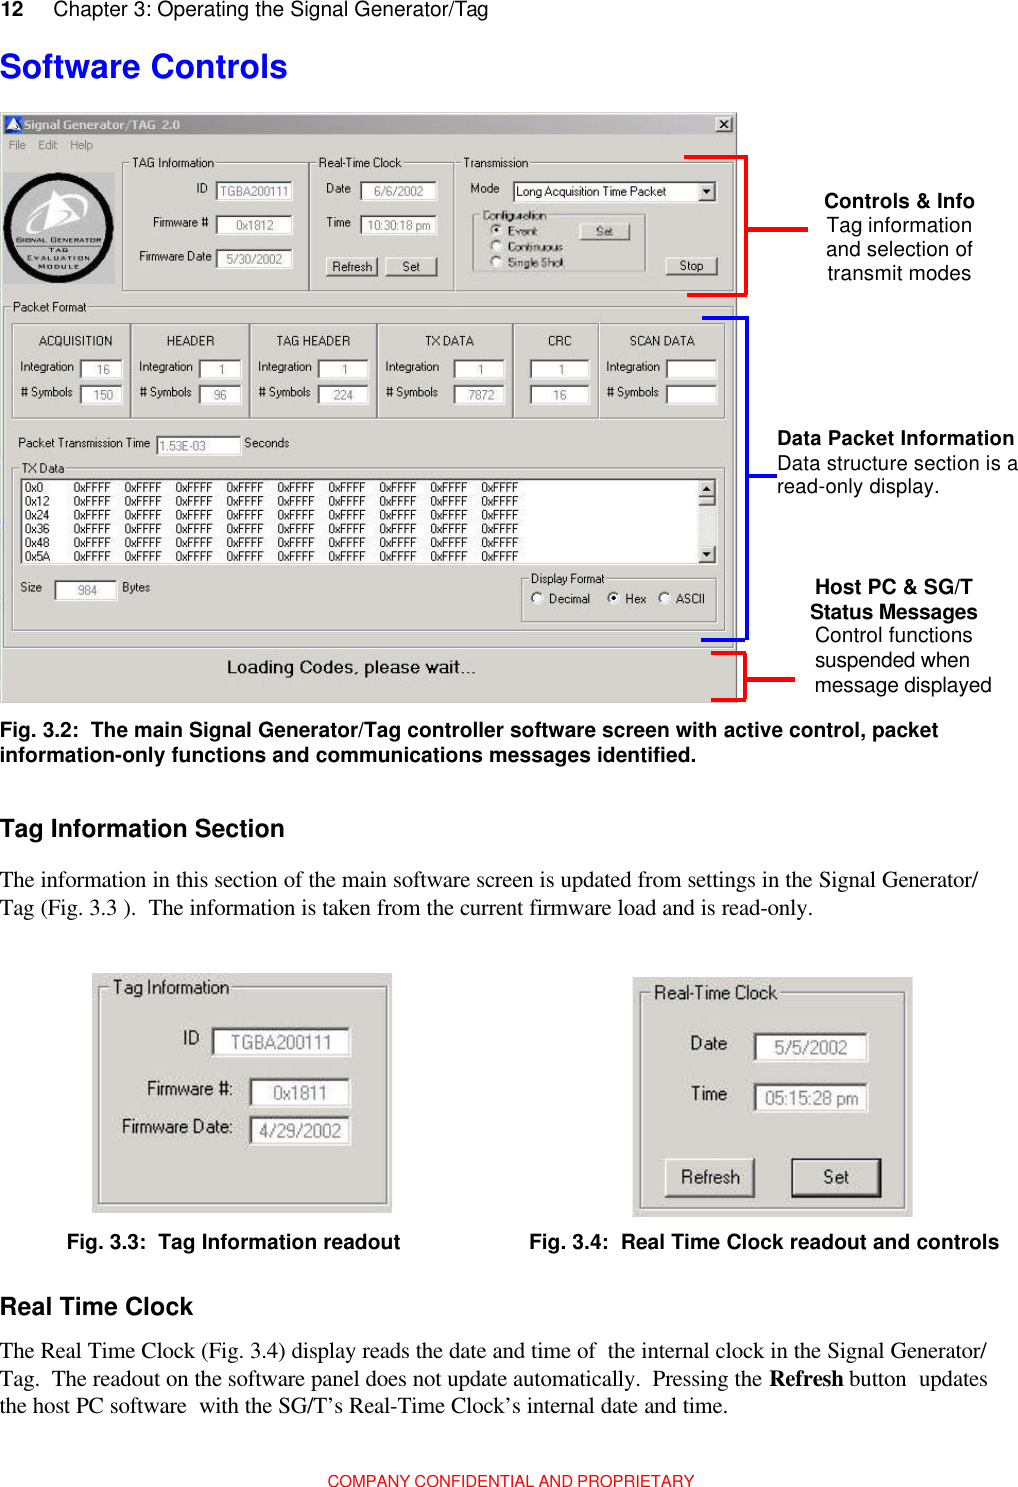 12     Chapter 3: Operating the Signal Generator/TagCOMPANY CONFIDENTIAL AND PROPRIETARYFig. 3.2:  The main Signal Generator/Tag controller software screen with active control, packetinformation-only functions and communications messages identified.Tag Information SectionThe information in this section of the main software screen is updated from settings in the Signal Generator/Tag (Fig. 3.3 ).  The information is taken from the current firmware load and is read-only.Fig. 3.3:  Tag Information readout Fig. 3.4:  Real Time Clock readout and controlsReal Time ClockThe Real Time Clock (Fig. 3.4) display reads the date and time of  the internal clock in the Signal Generator/Tag.  The readout on the software panel does not update automatically.  Pressing the Refresh button  updatesthe host PC software  with the SG/T’s Real-Time Clock’s internal date and time.Software Controls   Controls &amp; Info Tag information and selection of transmit modes  Data Packet Information Data structure section is a read-only display. Host PC &amp; SG/TStatus Messagesmessage displayedControl functionssuspended when